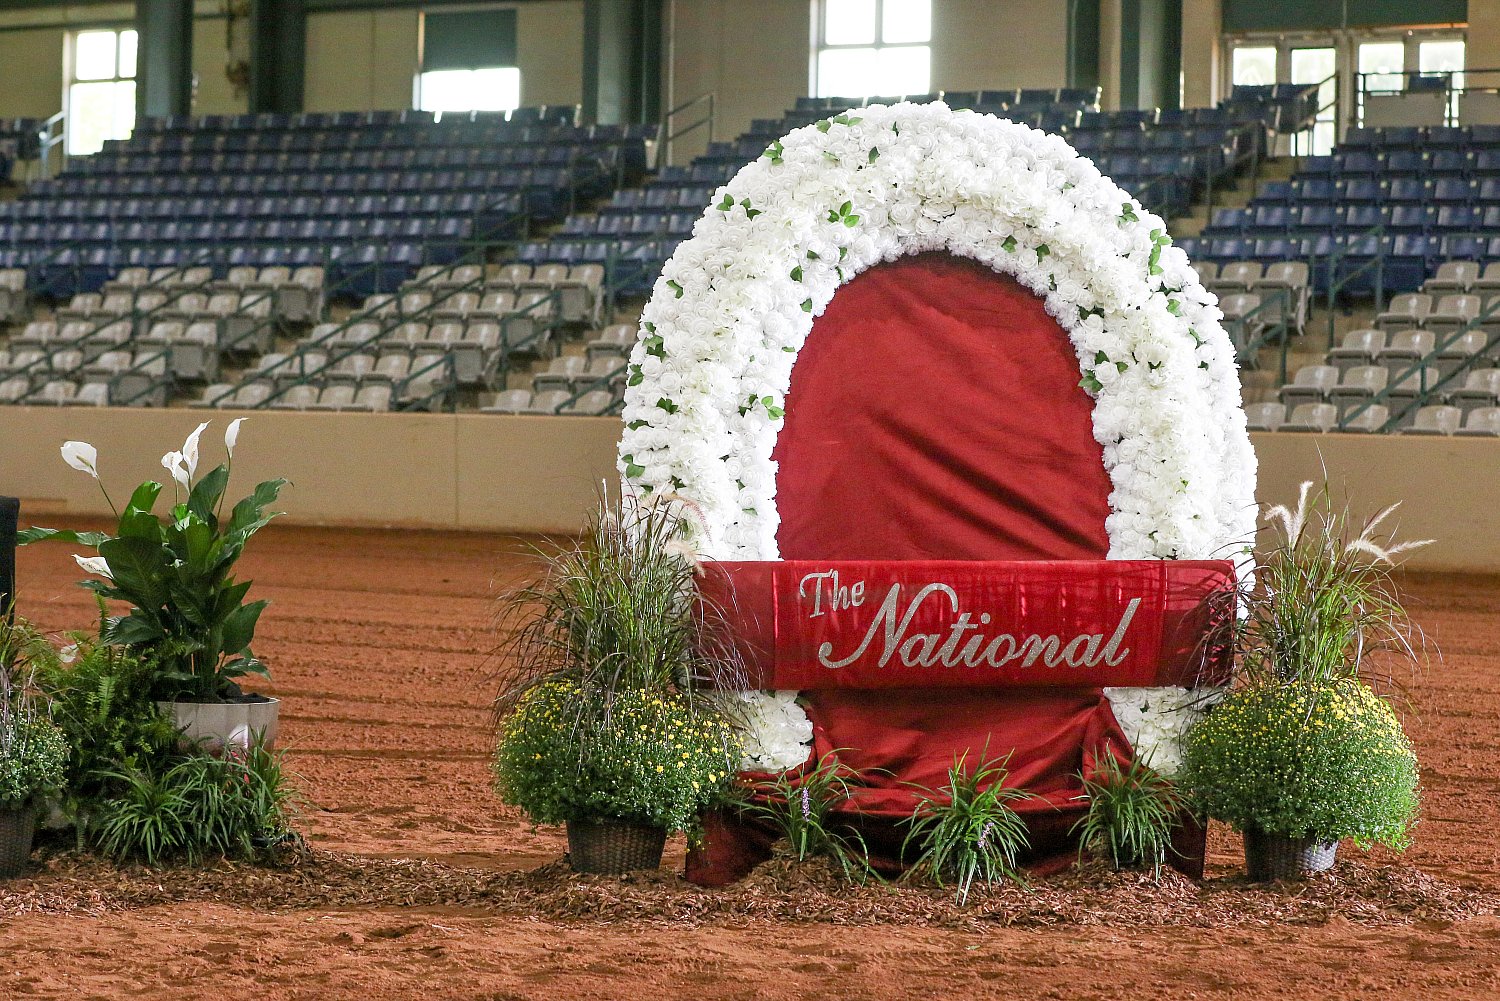 2023 Nationals Horse Shows 2023 Horse Shows